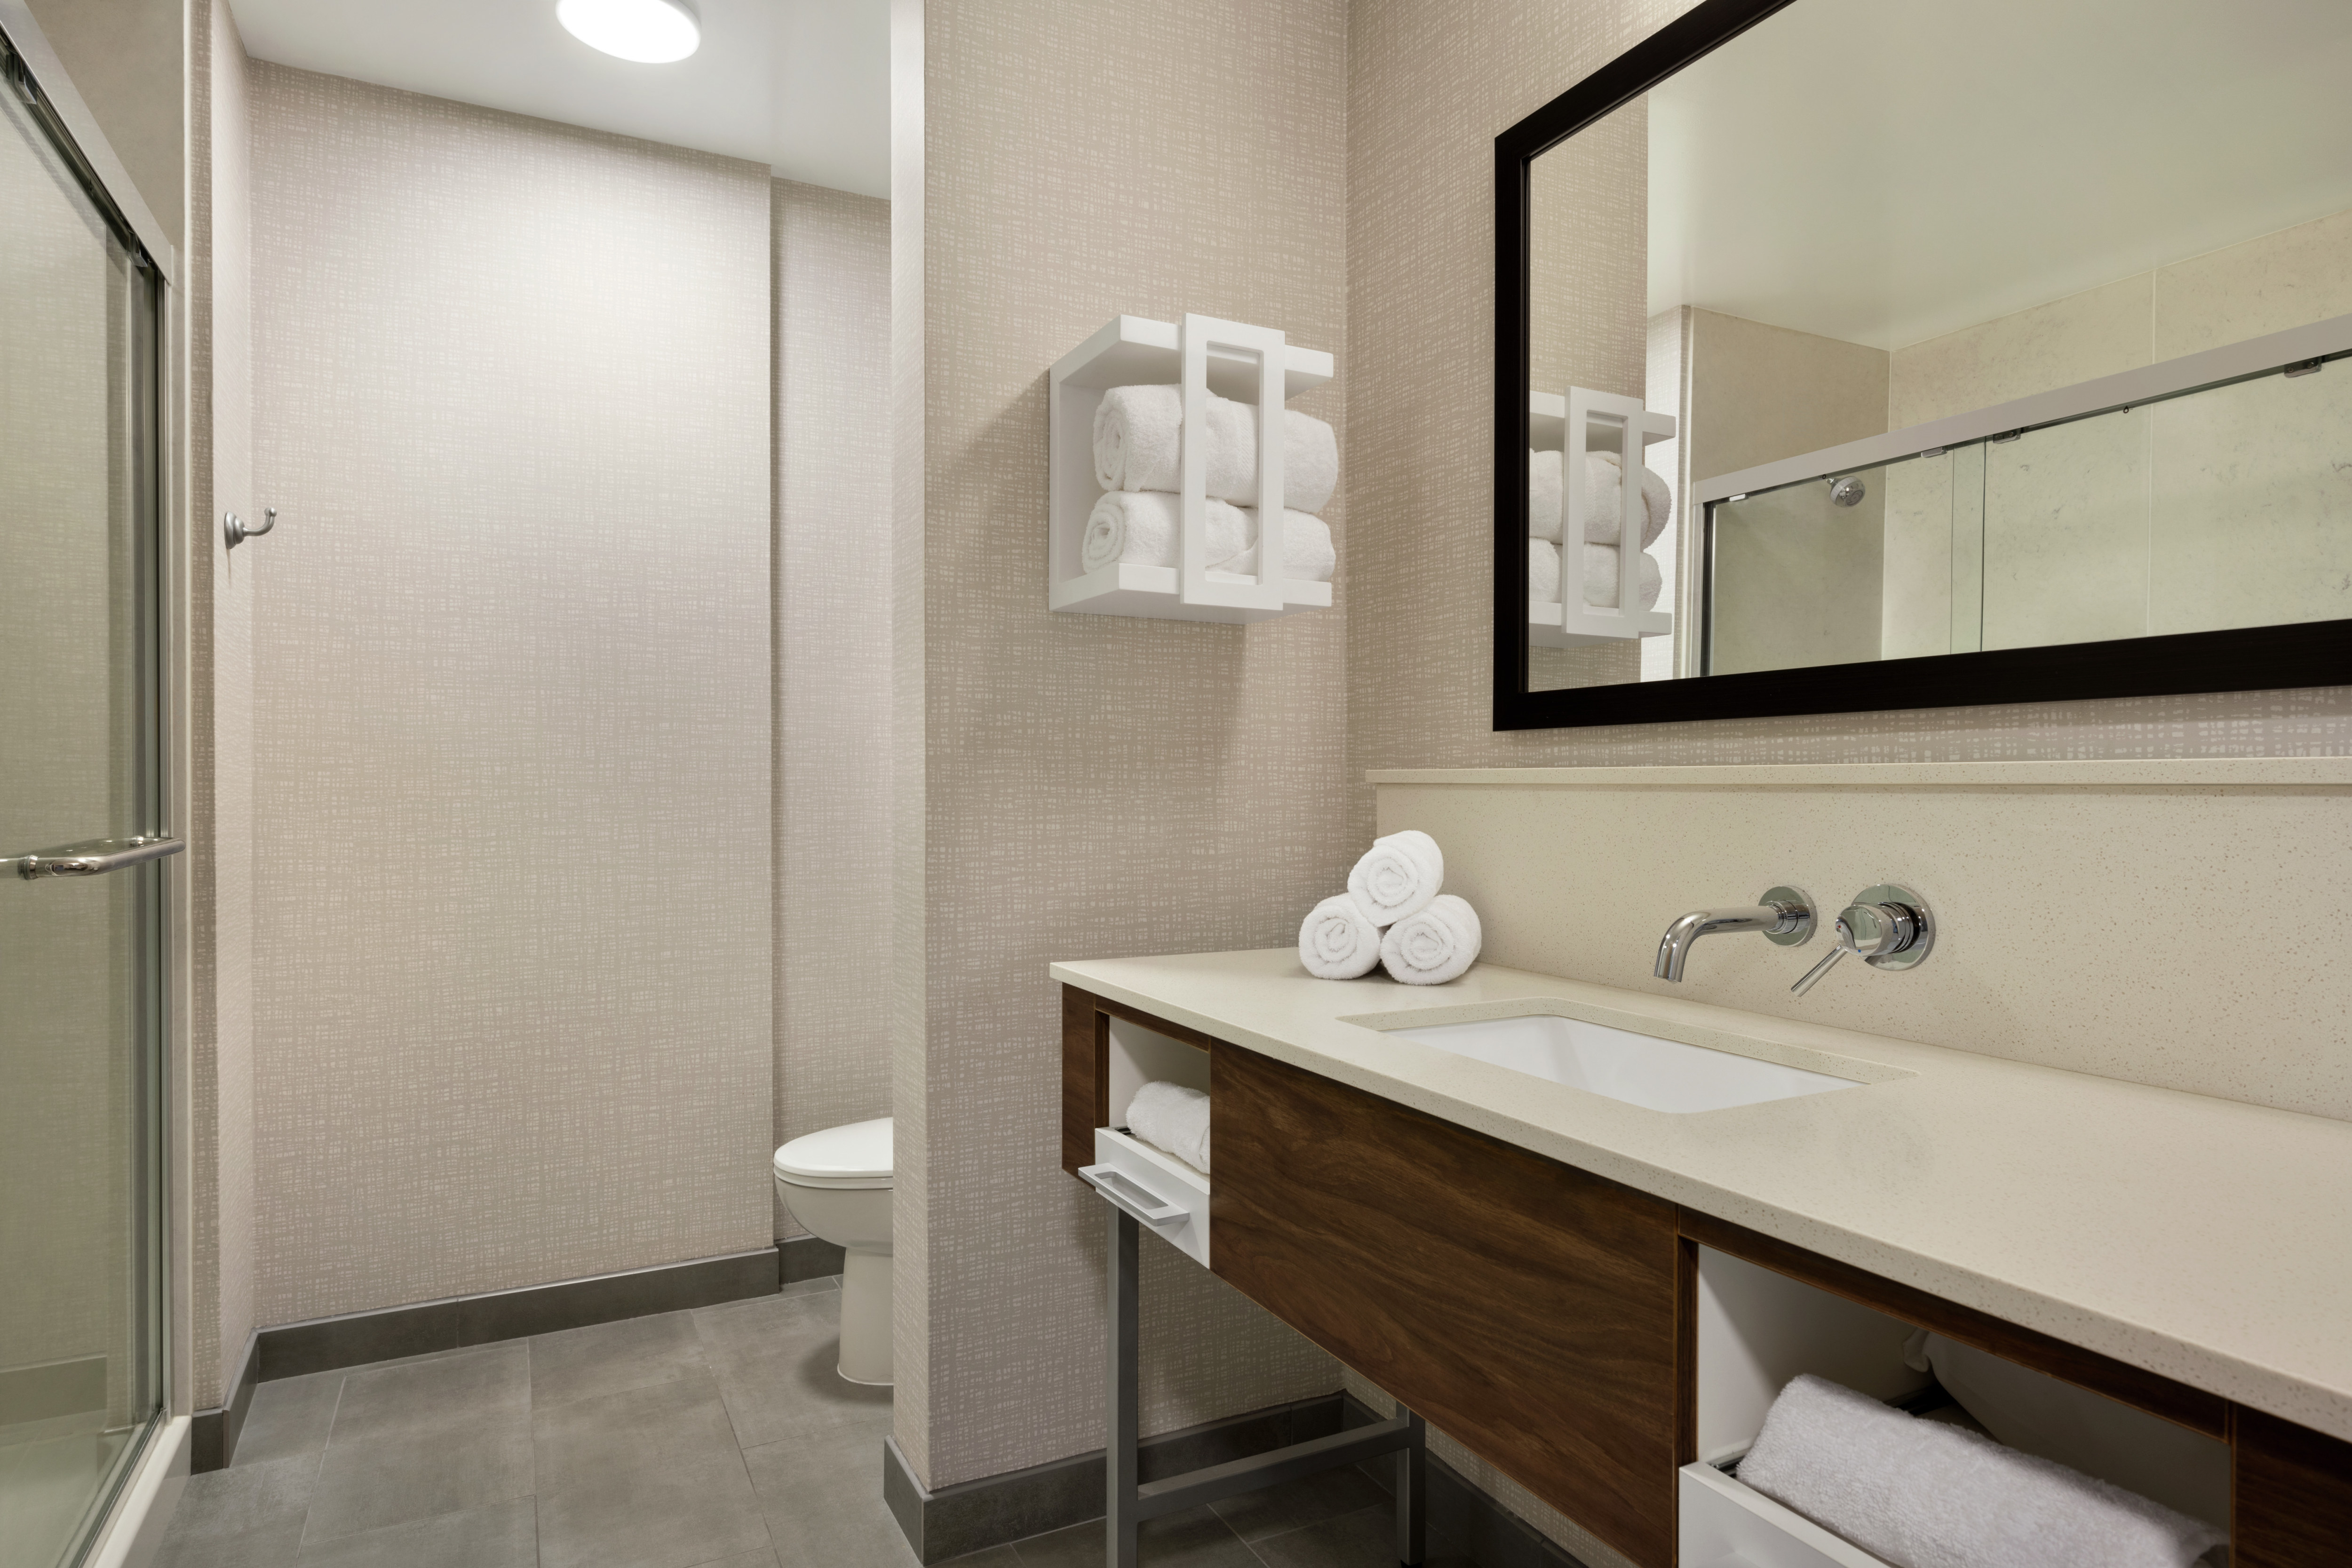 Spacious guest bathroom featuring walk-in shower with sliding glass door, large vanity, and mirror.